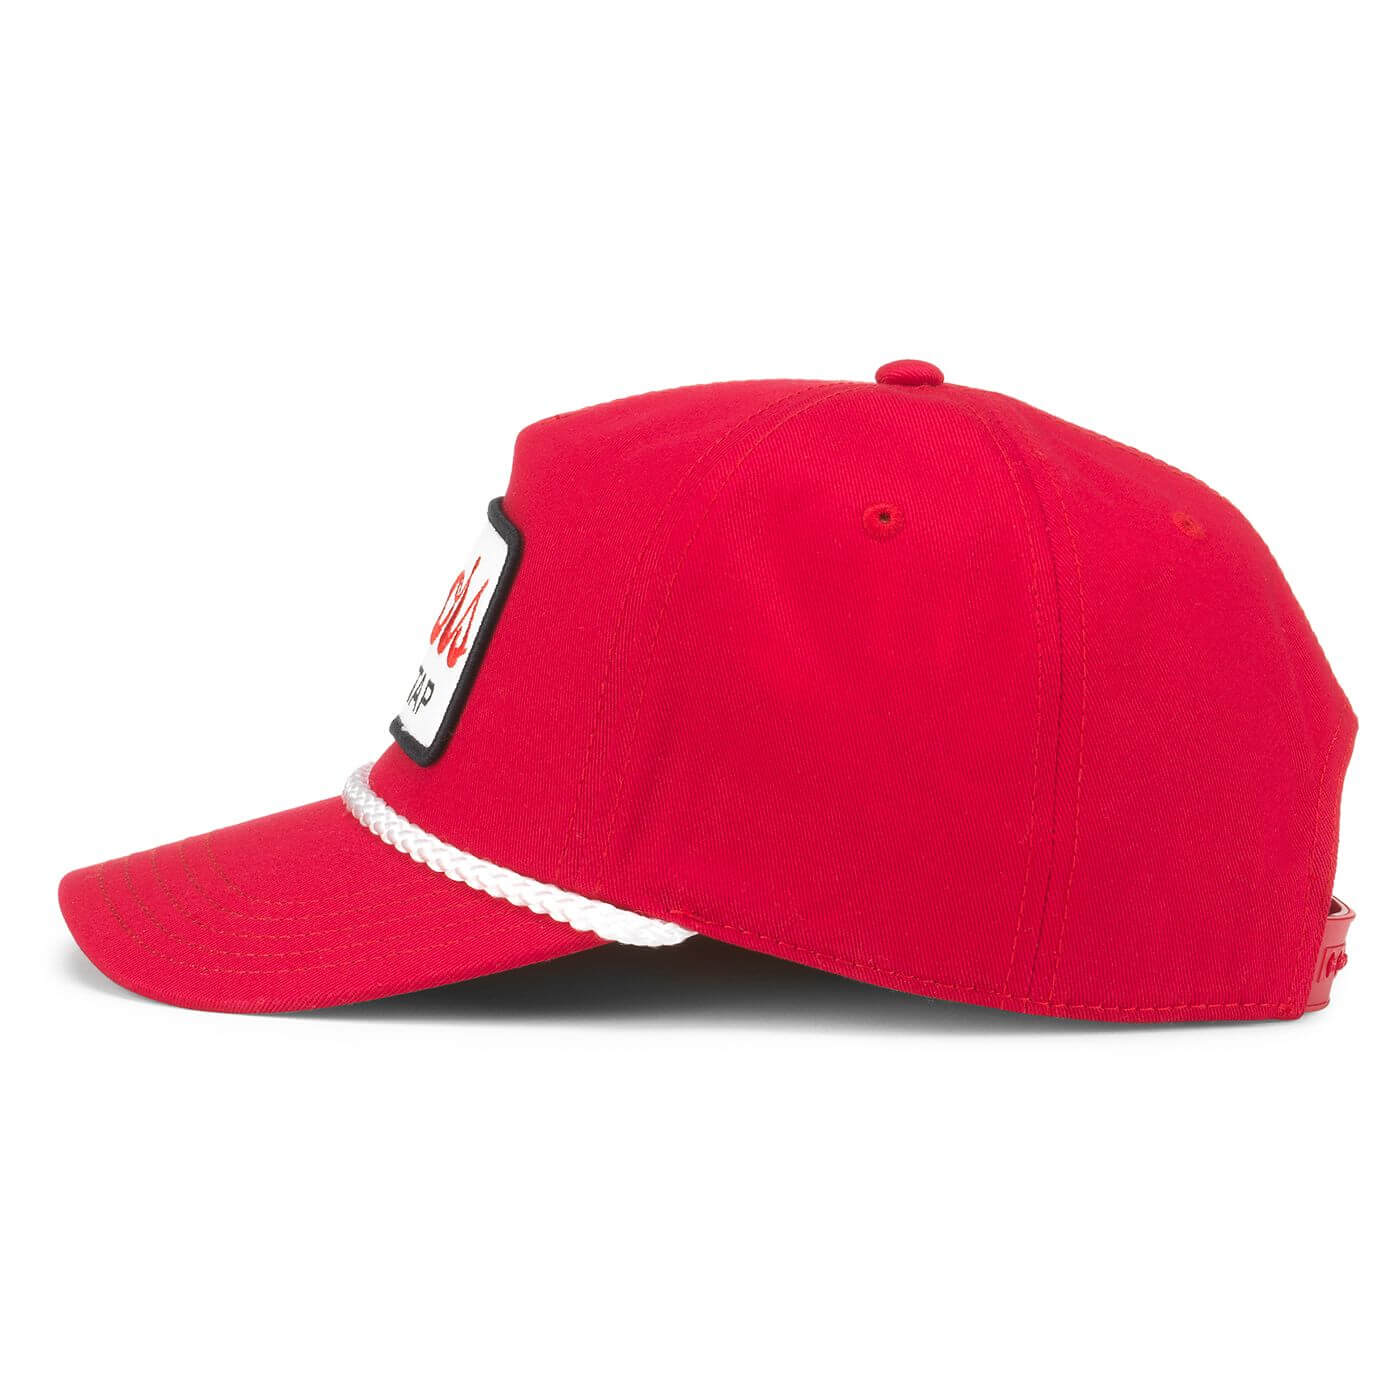 Coors On Tap Rope Hat: Red/White Snapback Trucker Hat | Beer Brands Side